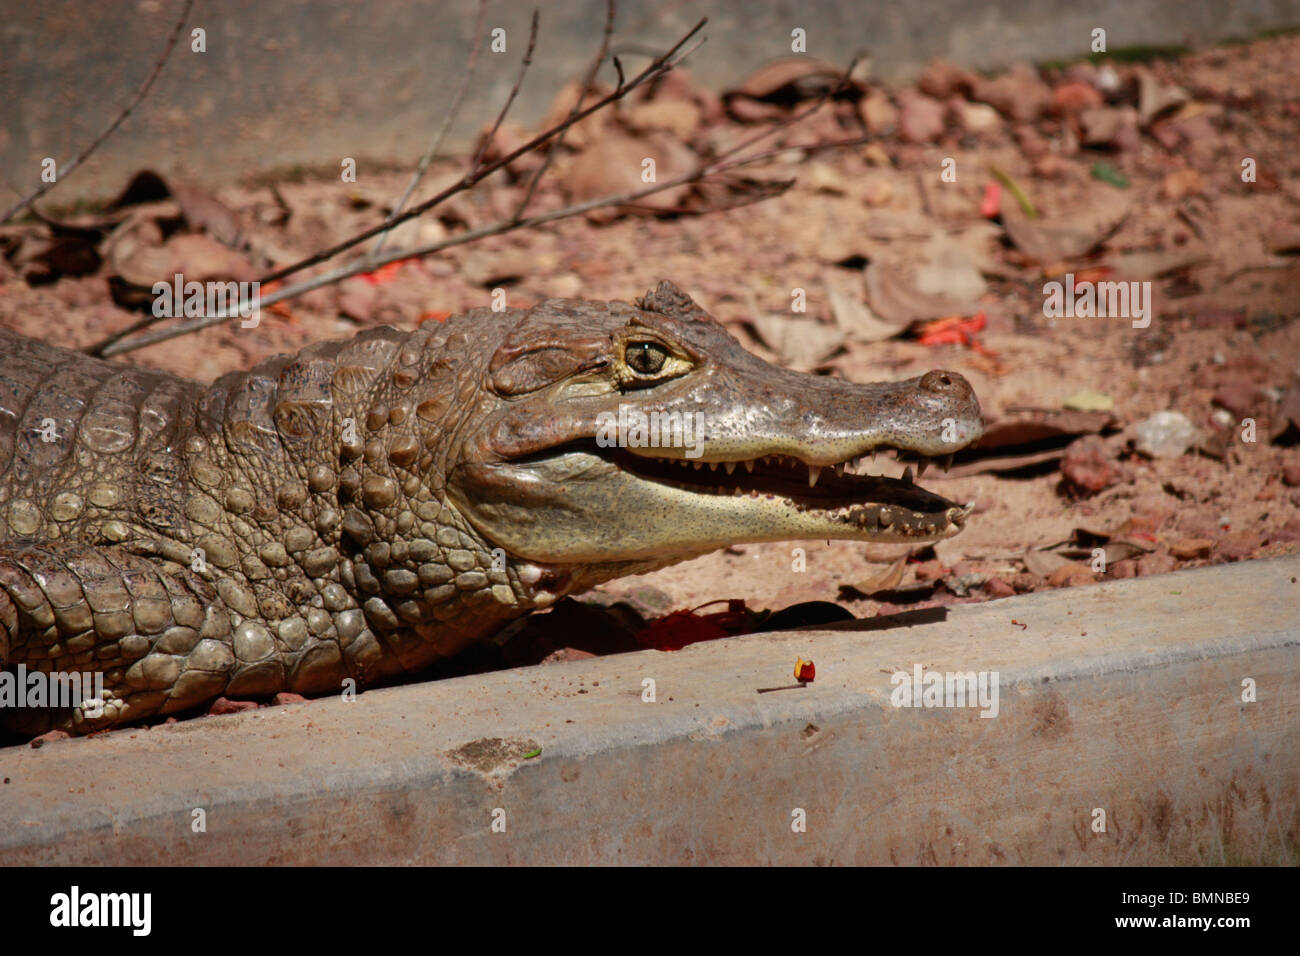 close up of a crocodile emerging from water searching for prey Stock Photo